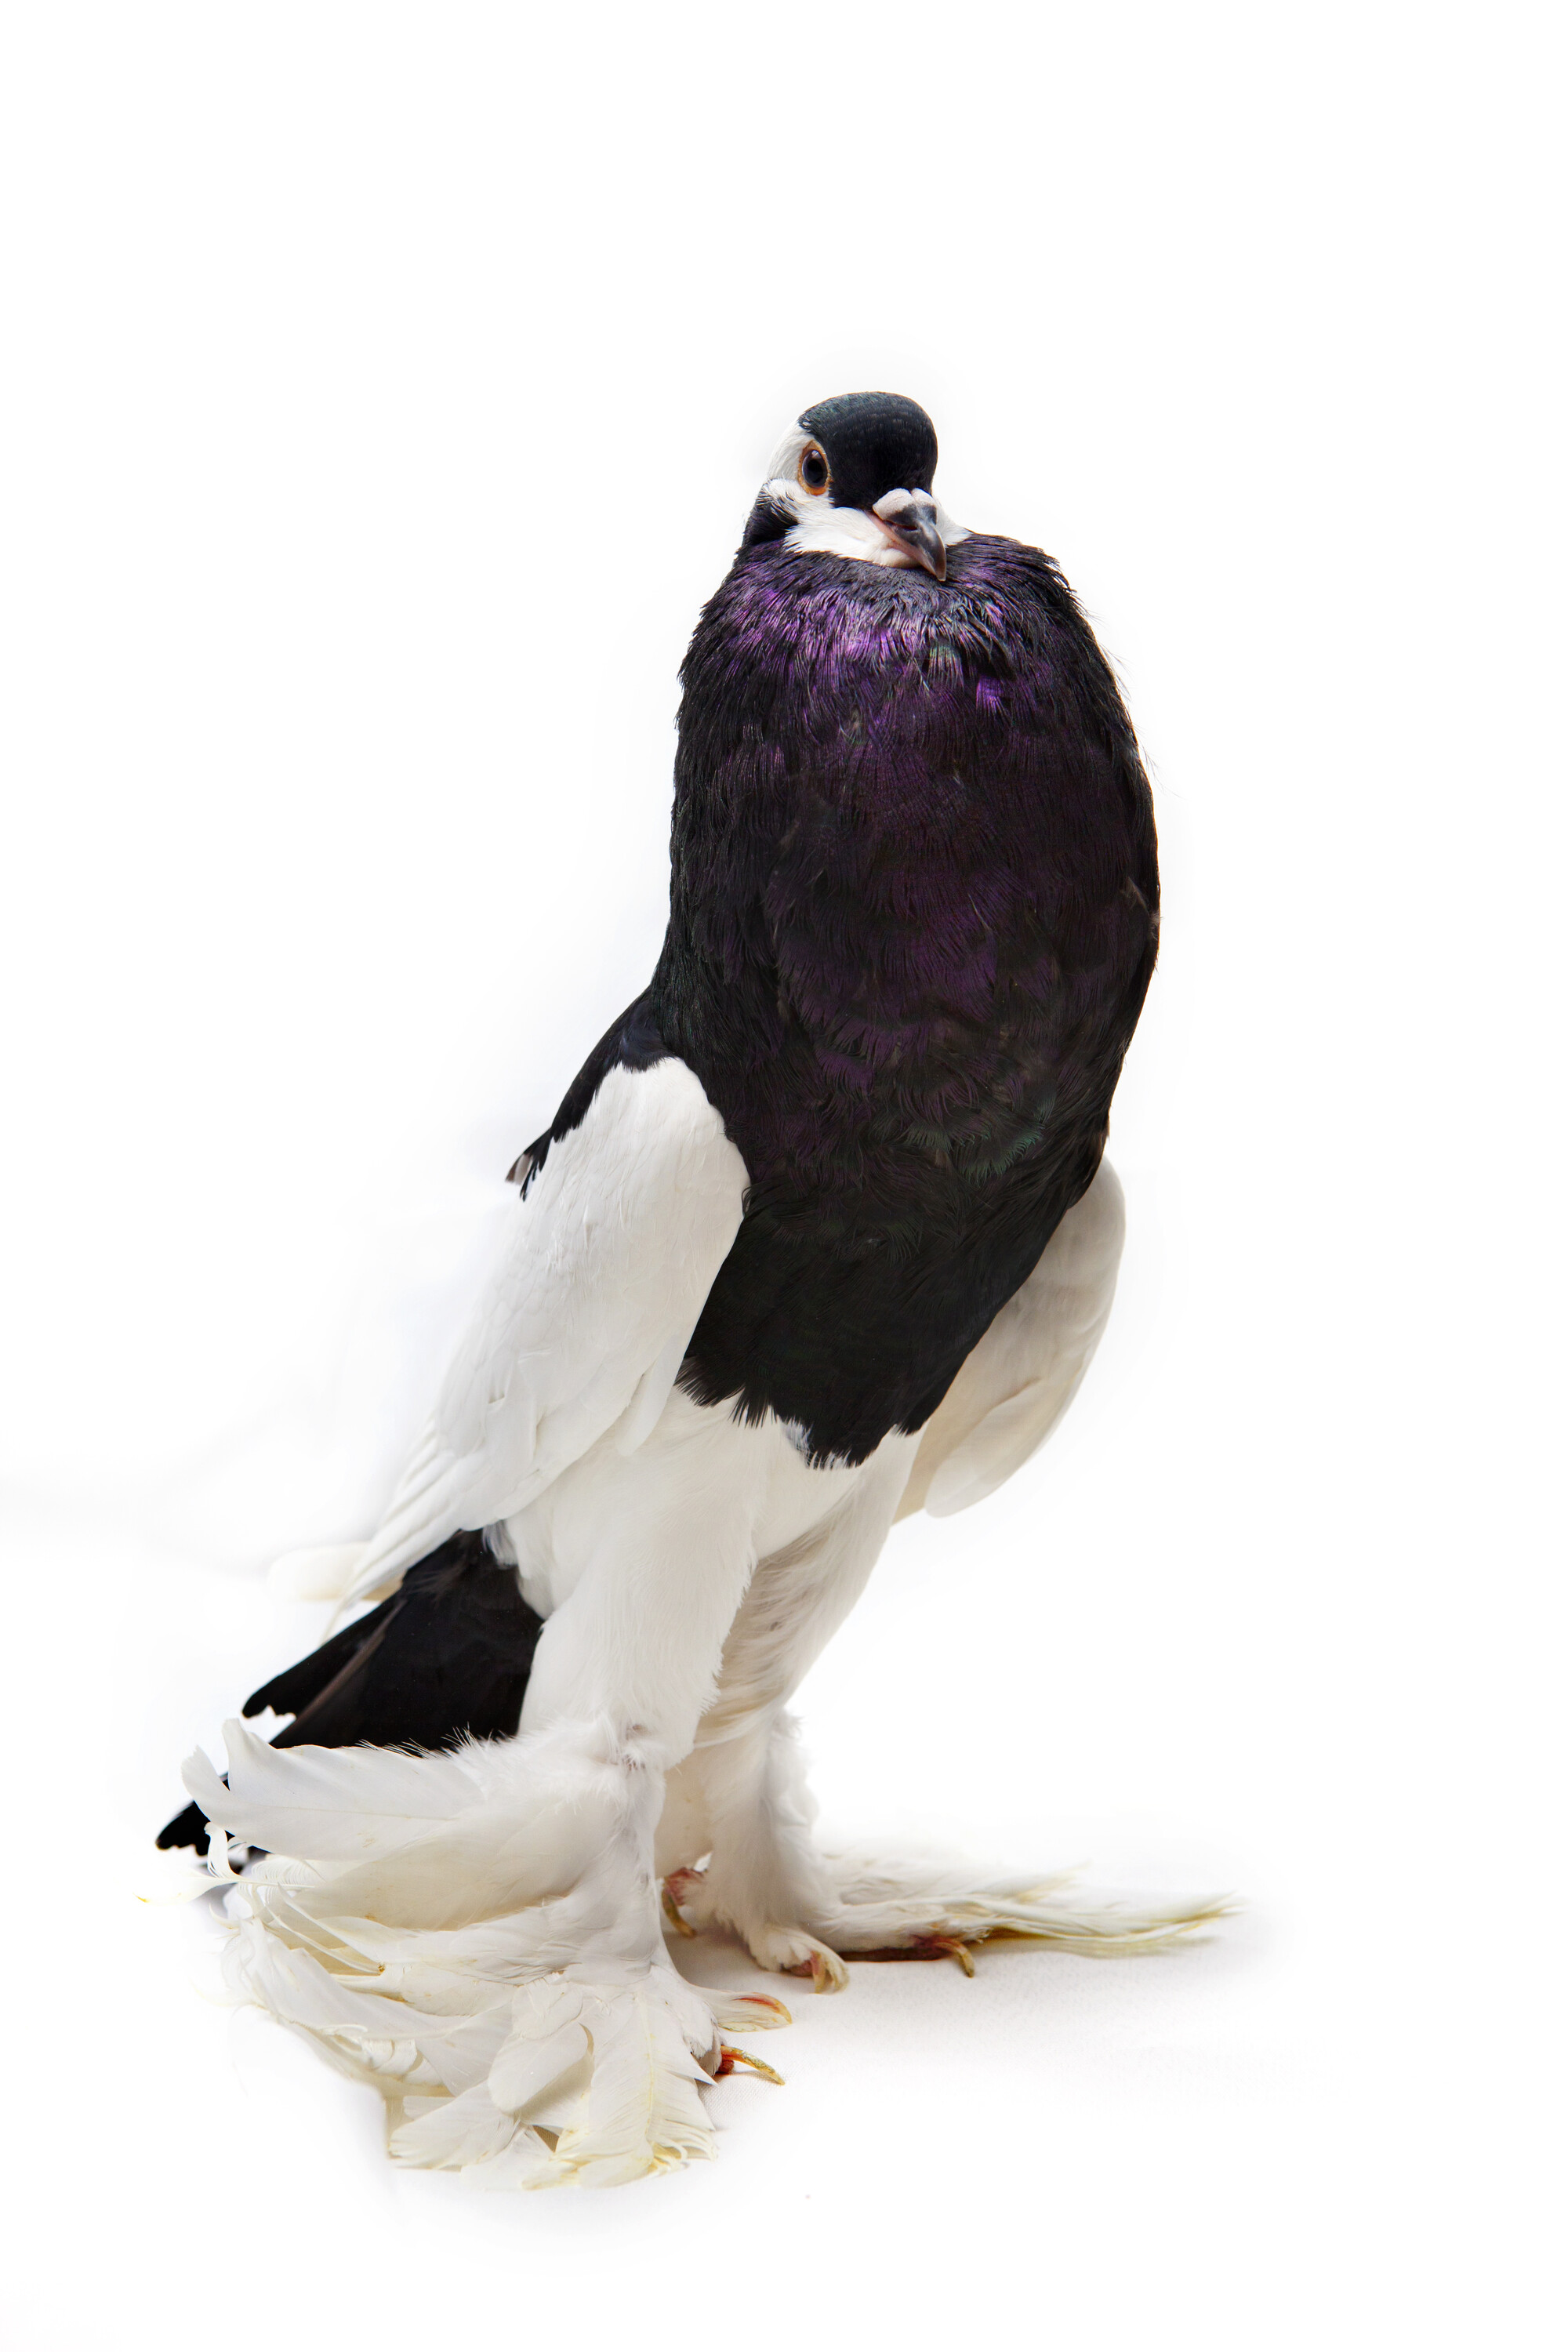 Fancy Pigeon: English Pouter - English Pouters are a very old breed and are known and recorded from the 1730s.